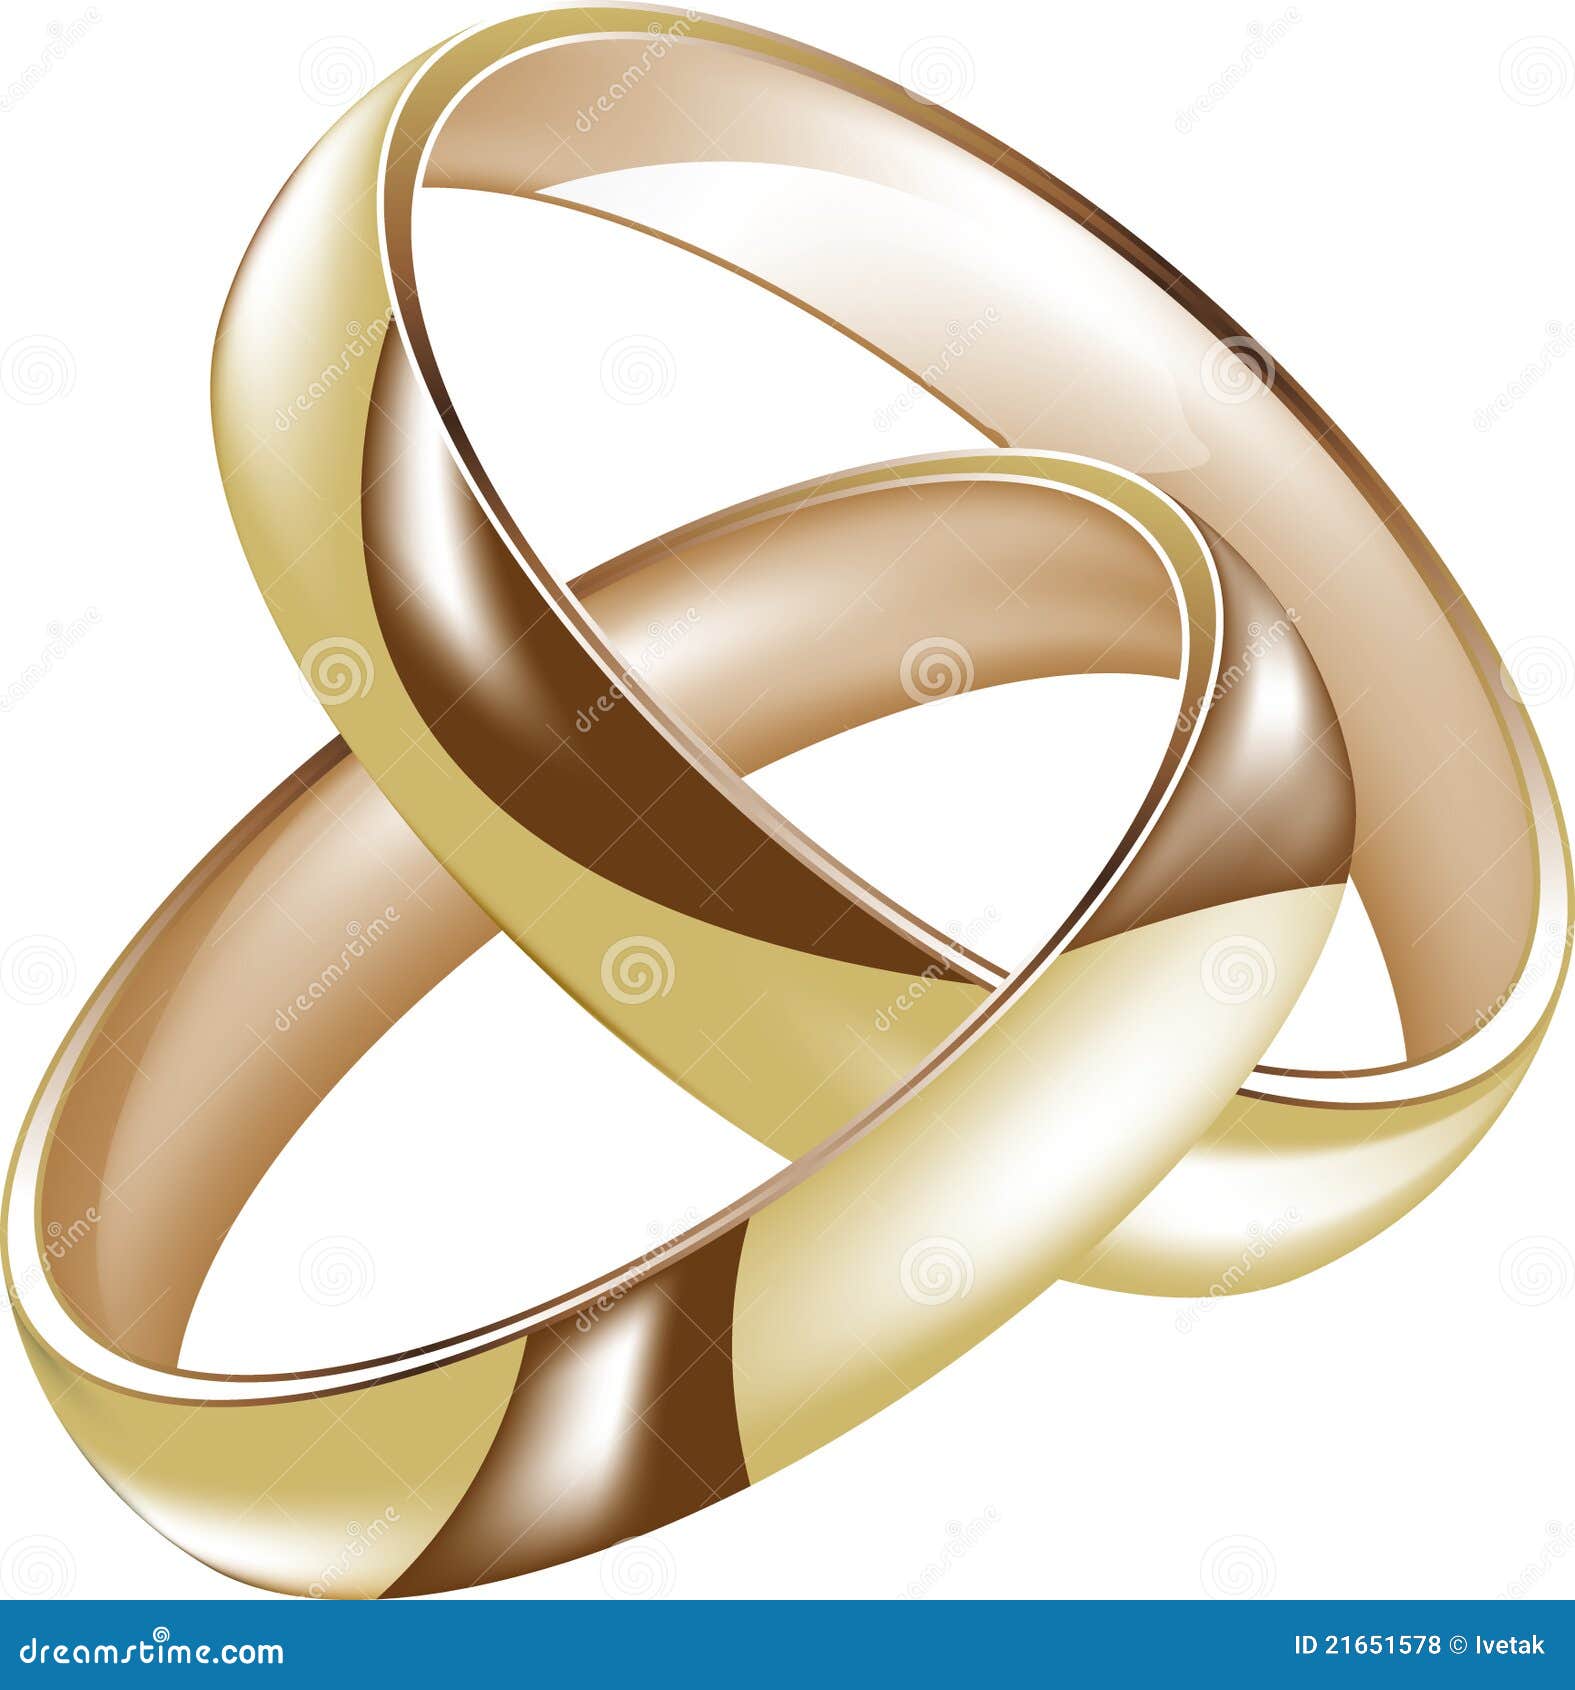 More similar stock images of ` Intertwined gold wedding rings `